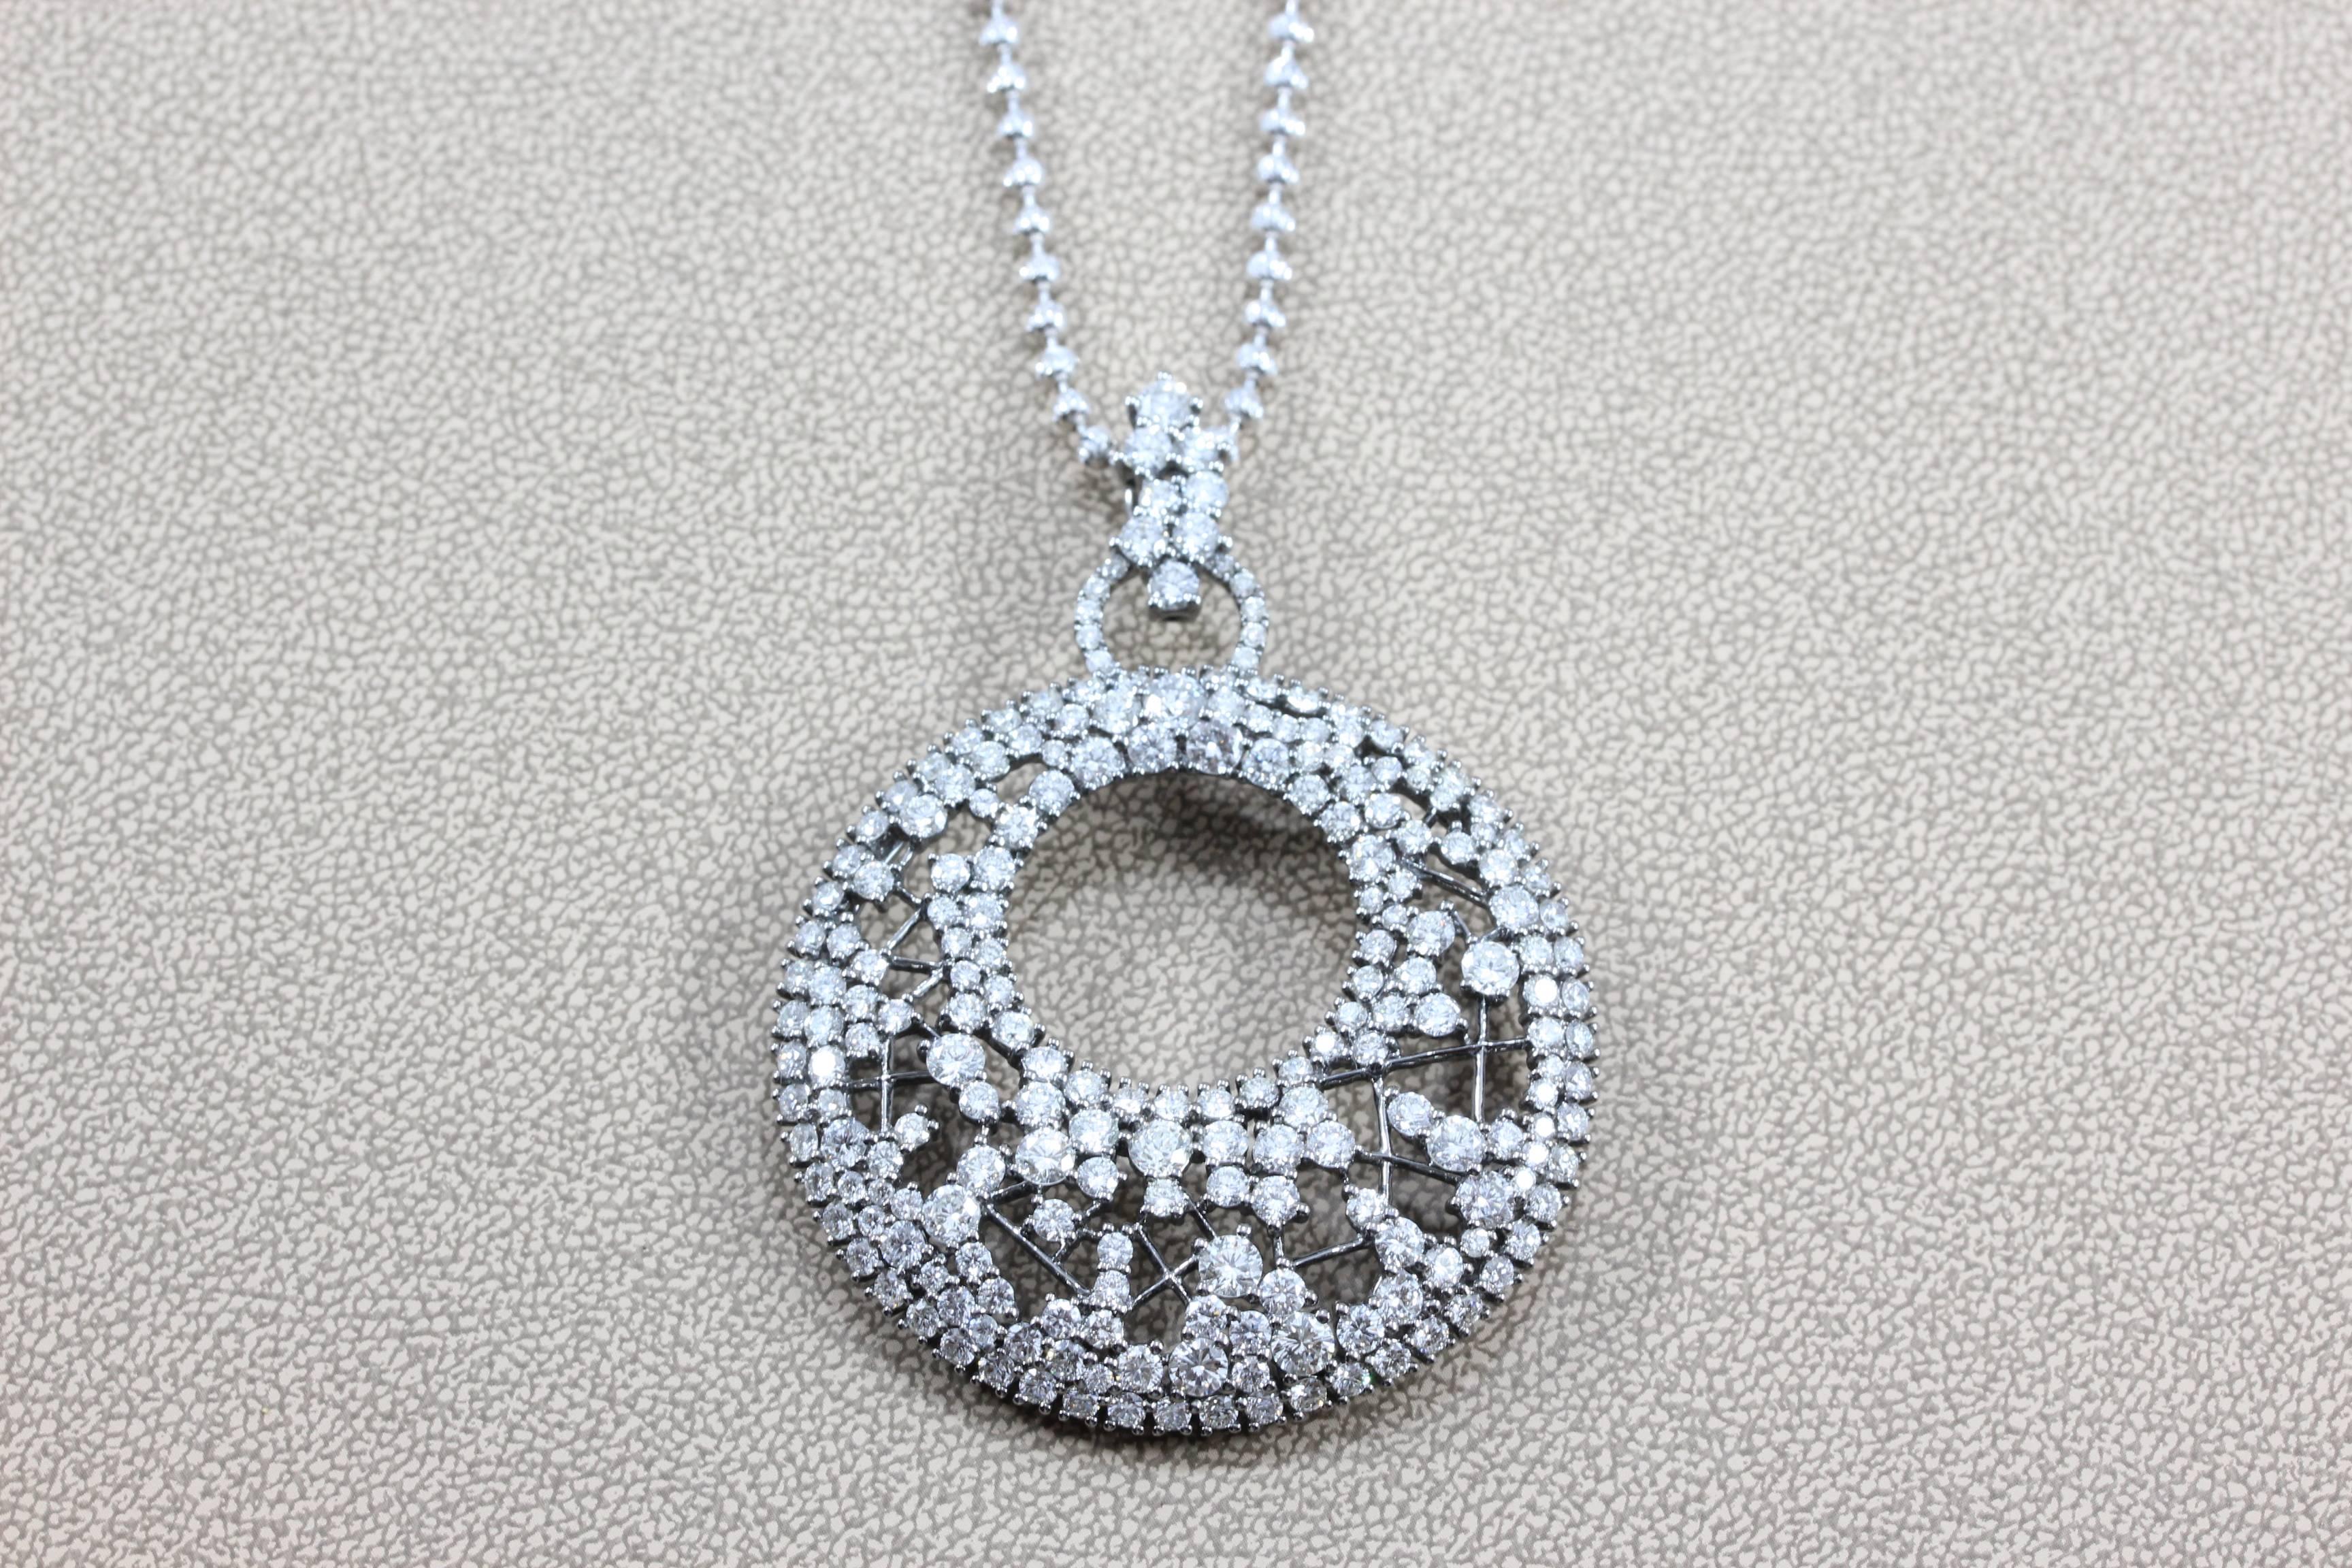 11.76 carats of near colorless and VS quality diamonds are set in this specially designed pendant.  This intricate pendant is sure to rock any outfit, day or evening.  The chain is 18K white gold and the pendant is 18K black rhodium gold.  

Chain